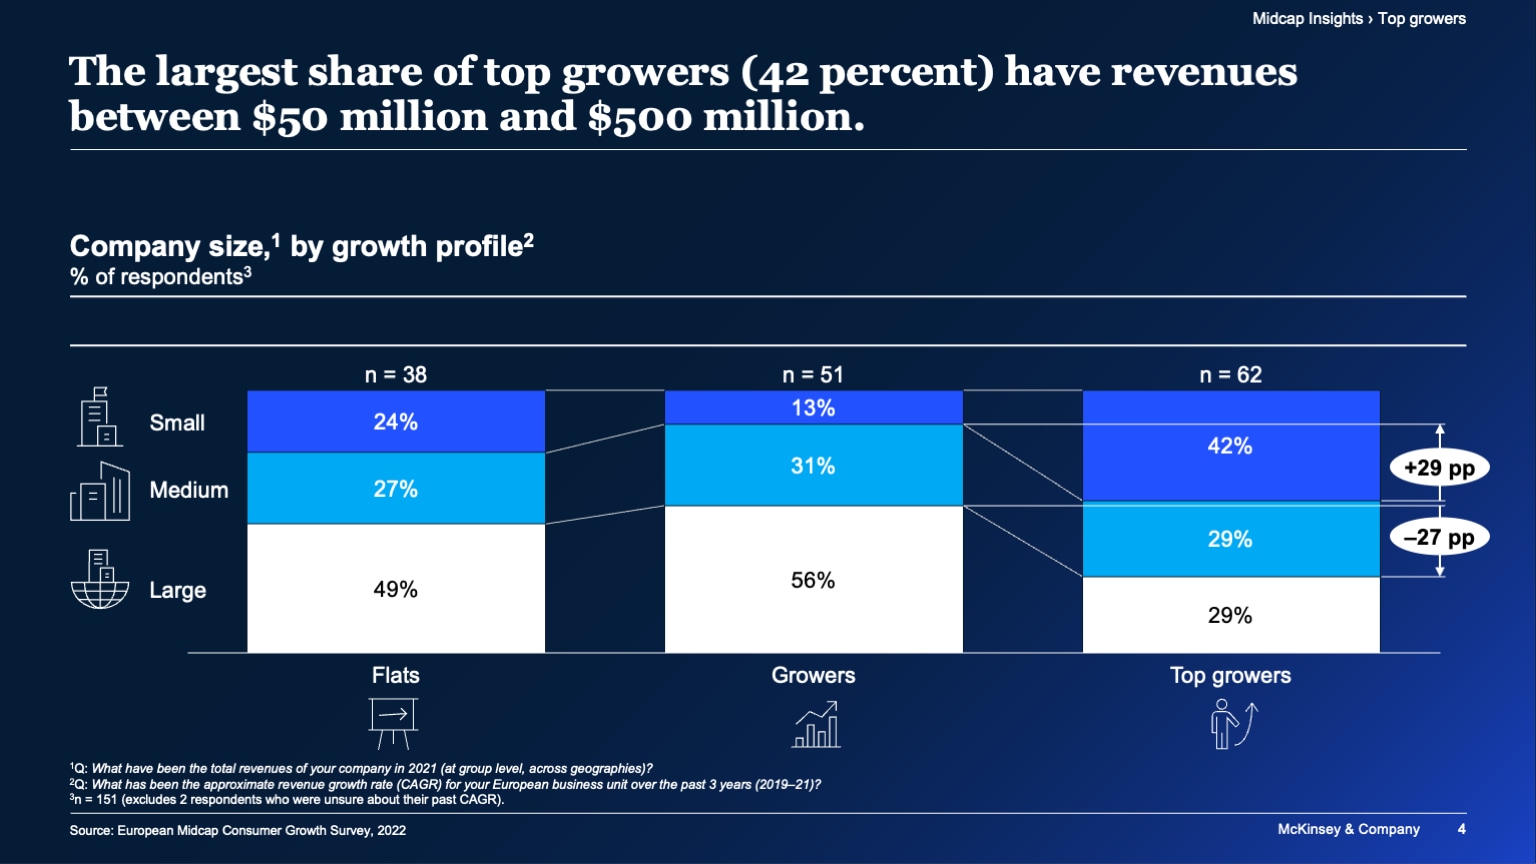 The largest share of top growers (42 percent) have revenues between $50 million and $500 million.